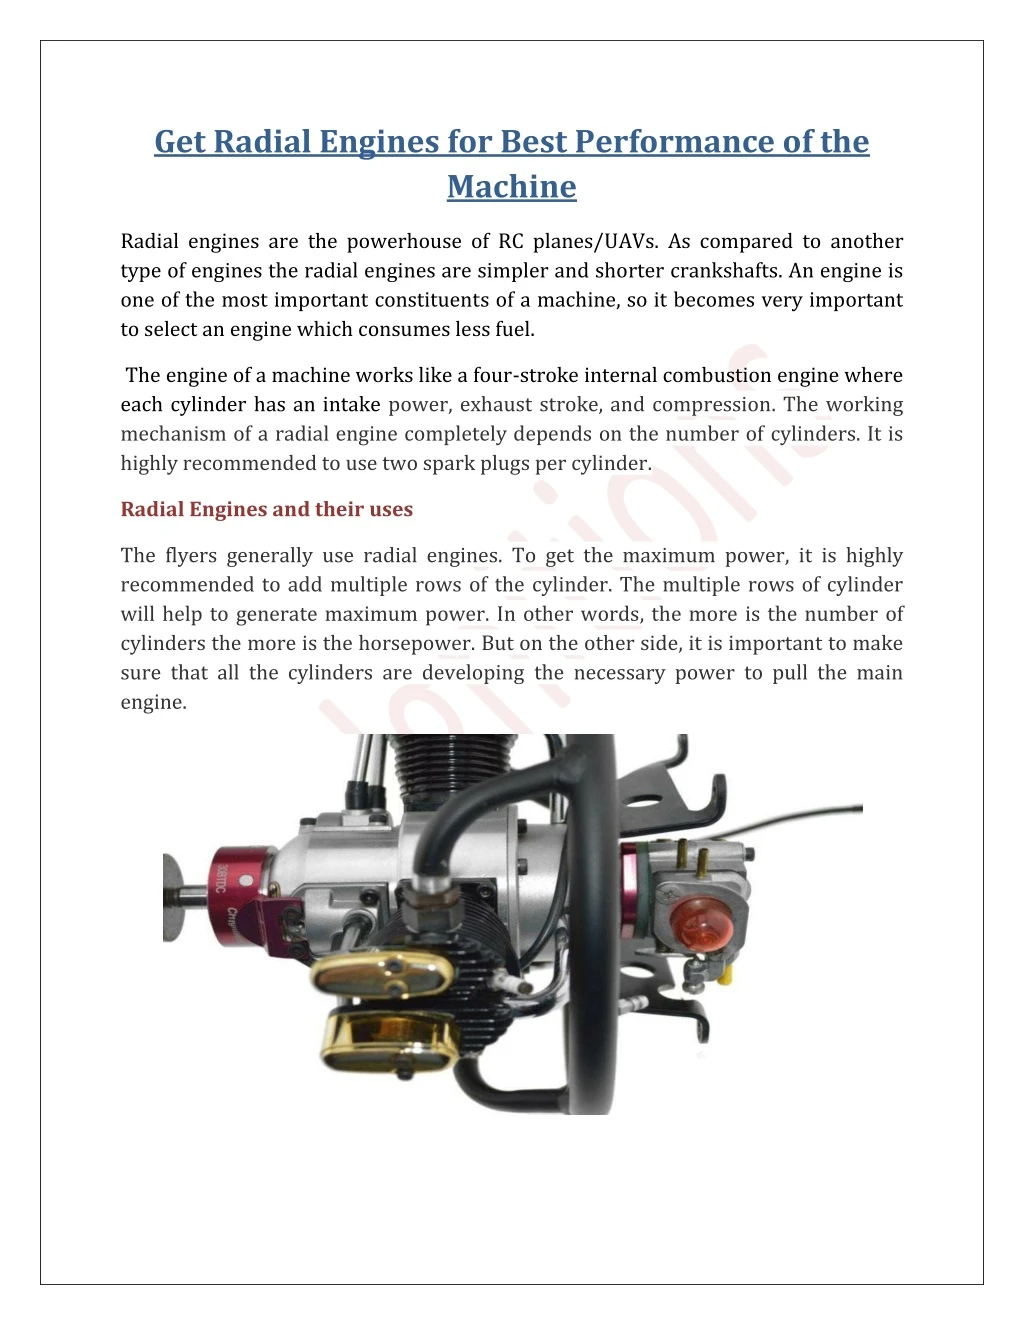 get radial engines for best performance